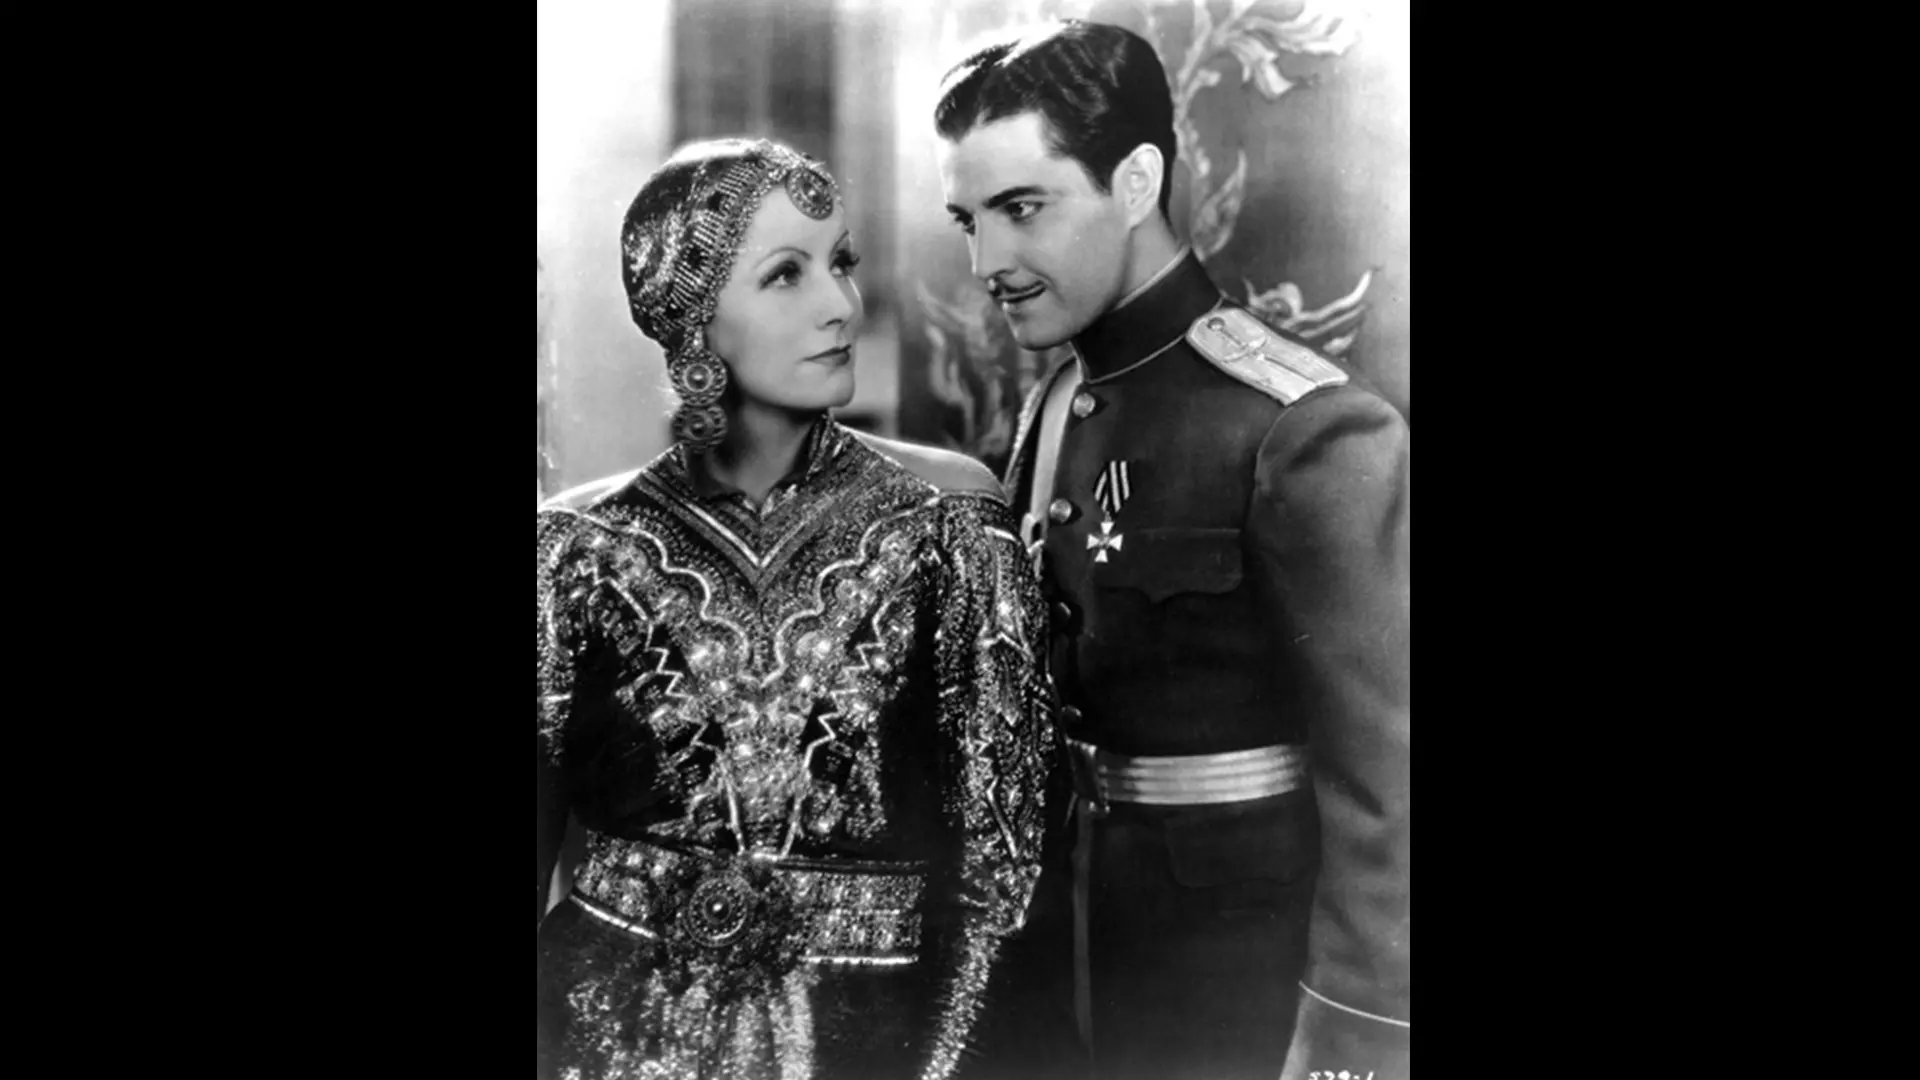 Notably in Hollywood, the early avatar of boss girl has been a spy. Mata Hari stands as an example.